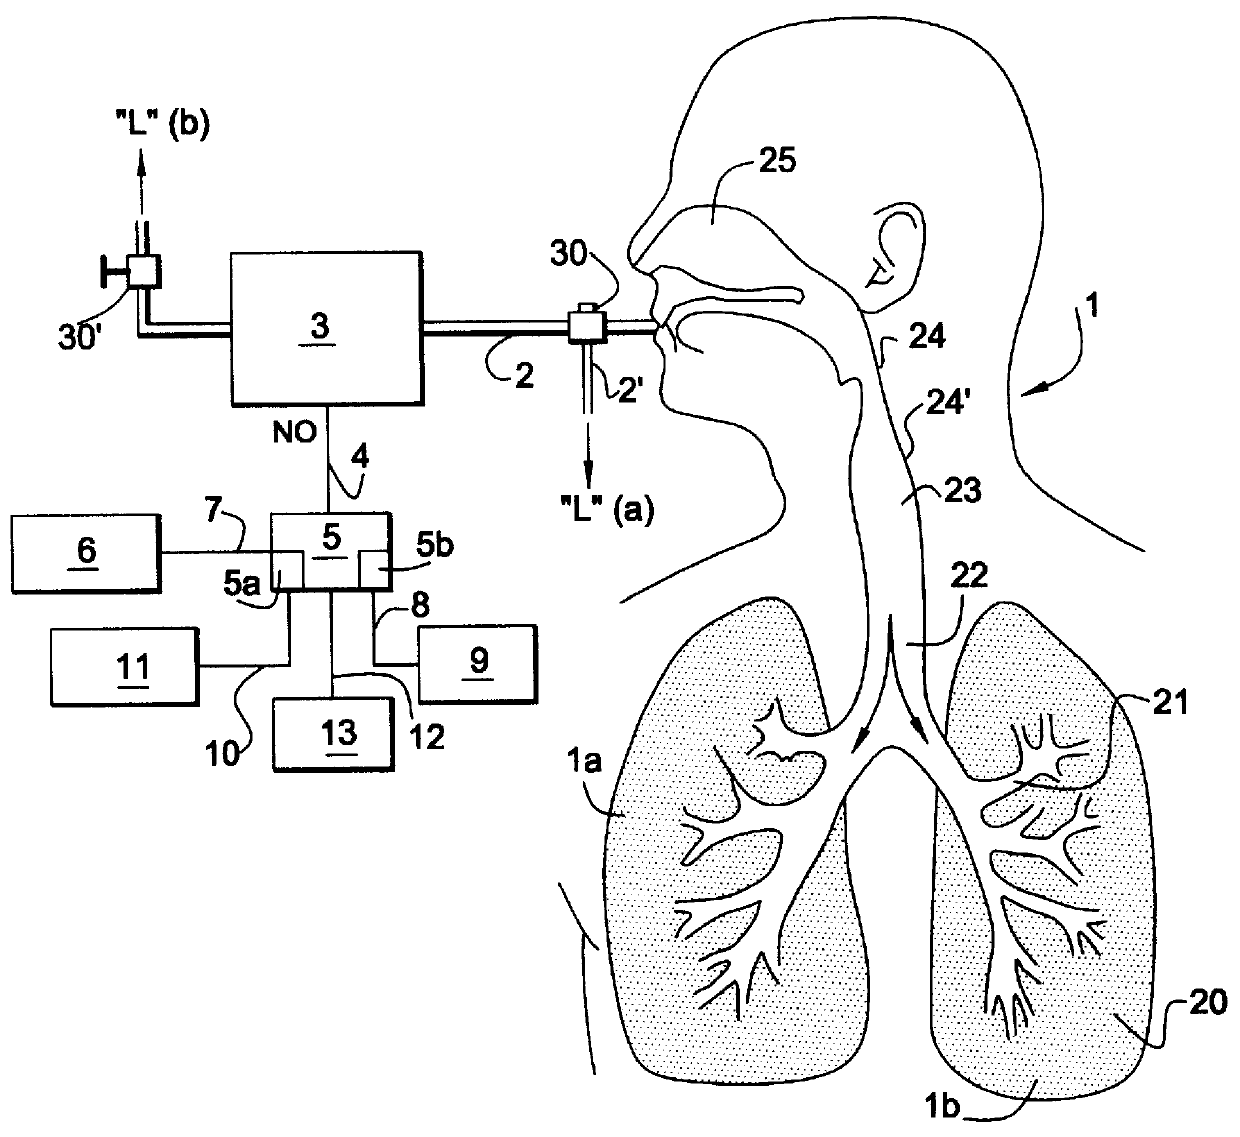 Device for determining the levels of NO in exhaled air